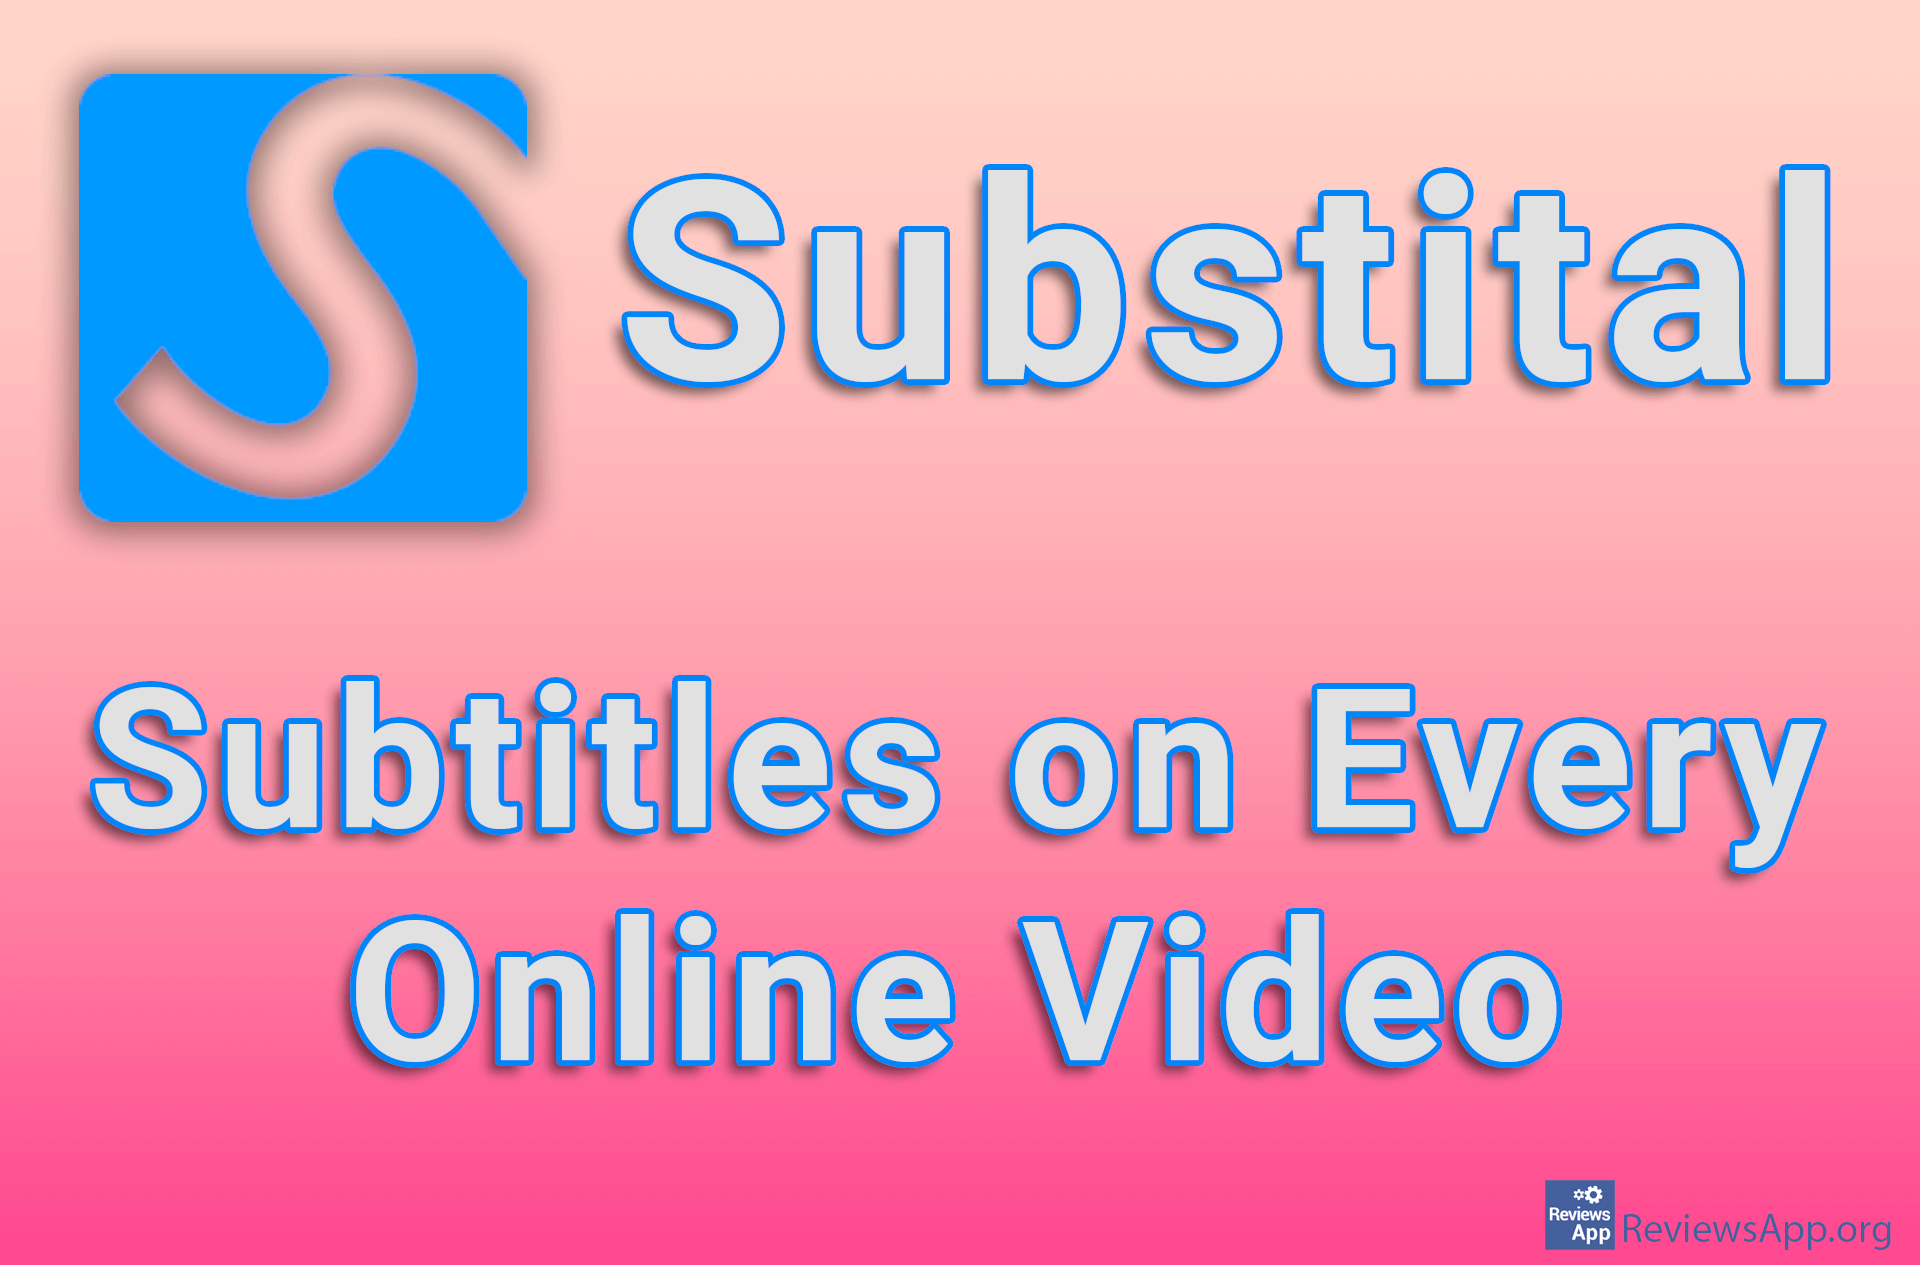 Substital – Subtitles on Every Online Video